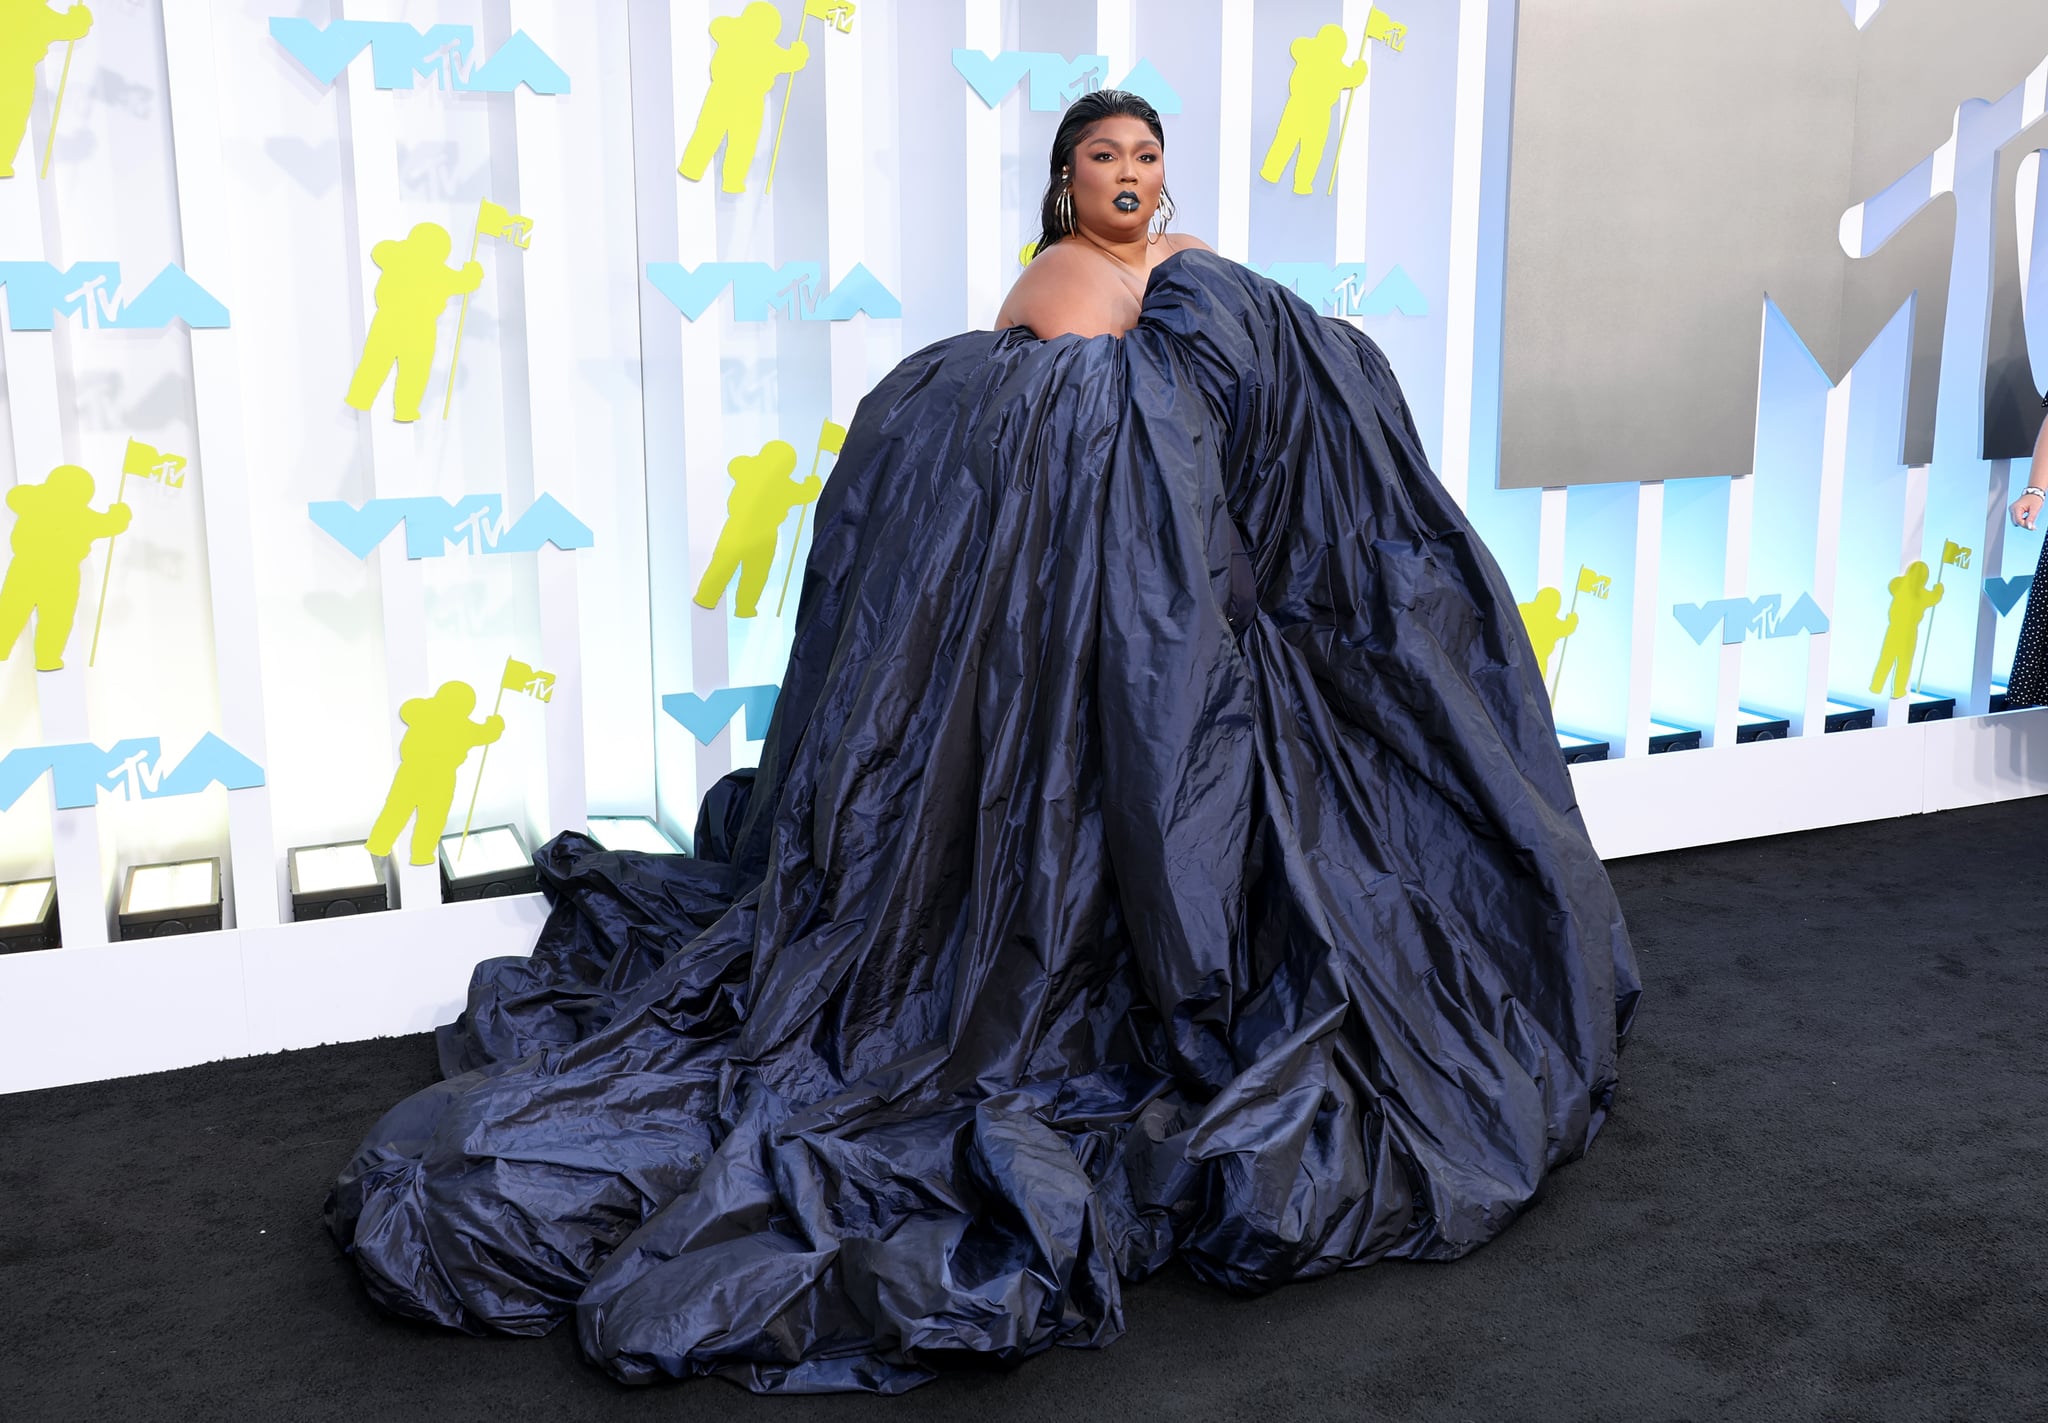 NEWARK, NEW JERSEY - AUGUST 28: Lizzo attends the 2022 MTV VMAs at Prudential Centre on August 28, 2022 in Newark, New Jersey. (Photo by Cindy Ord/WireImage)